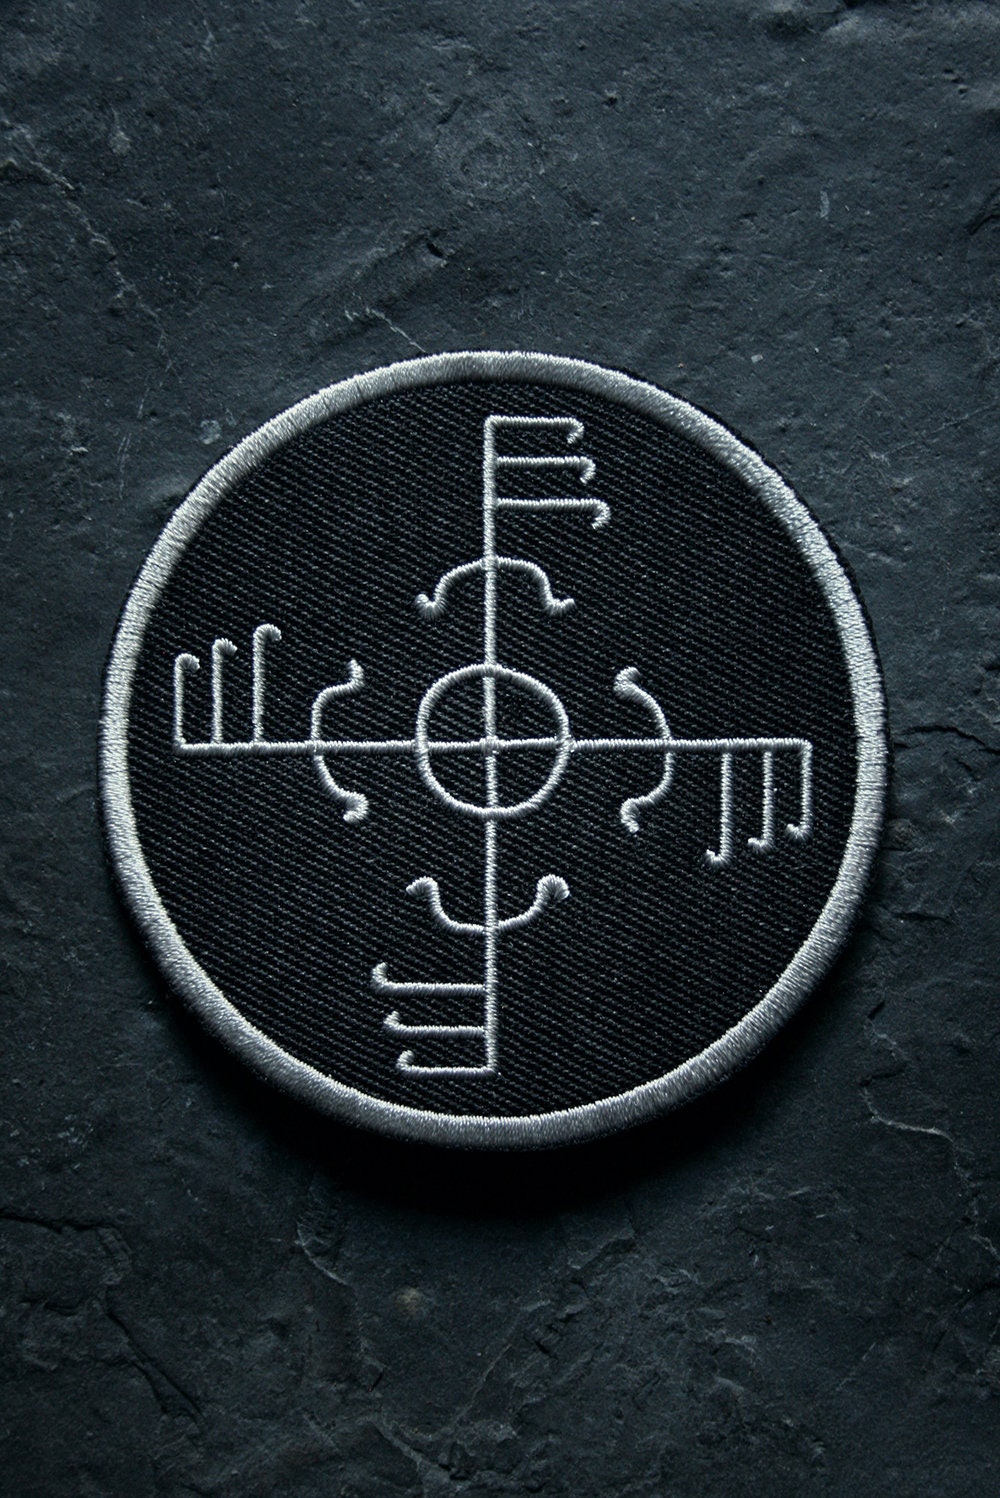 Ginfaxi icelandic talisman - PATCH